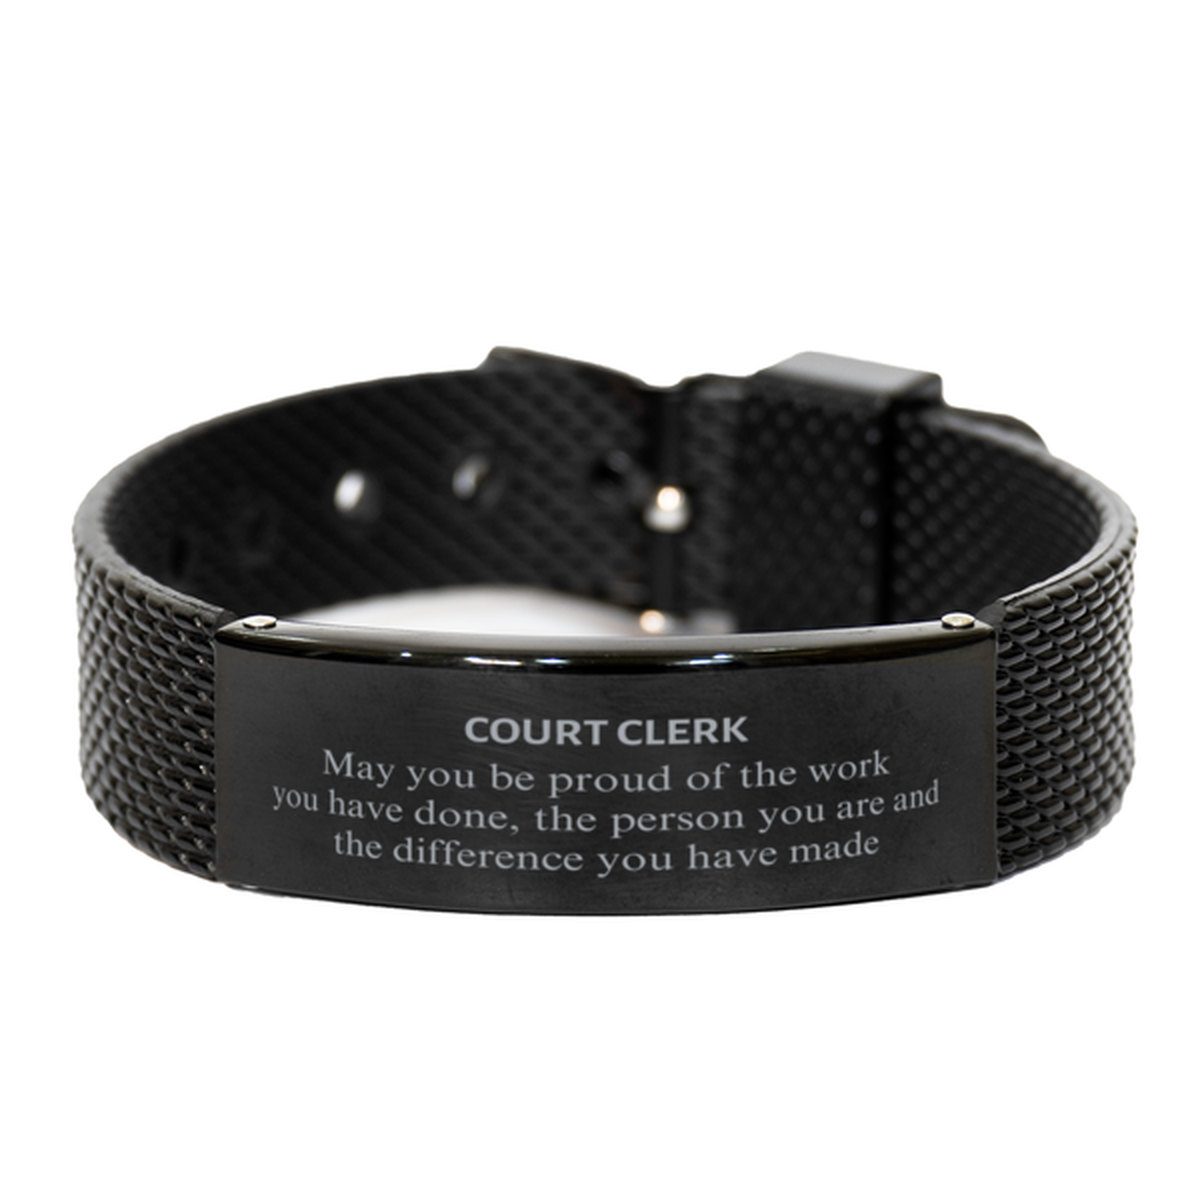 Court Clerk May you be proud of the work you have done, Retirement Court Clerk Black Shark Mesh Bracelet for Colleague Appreciation Gifts Amazing for Court Clerk